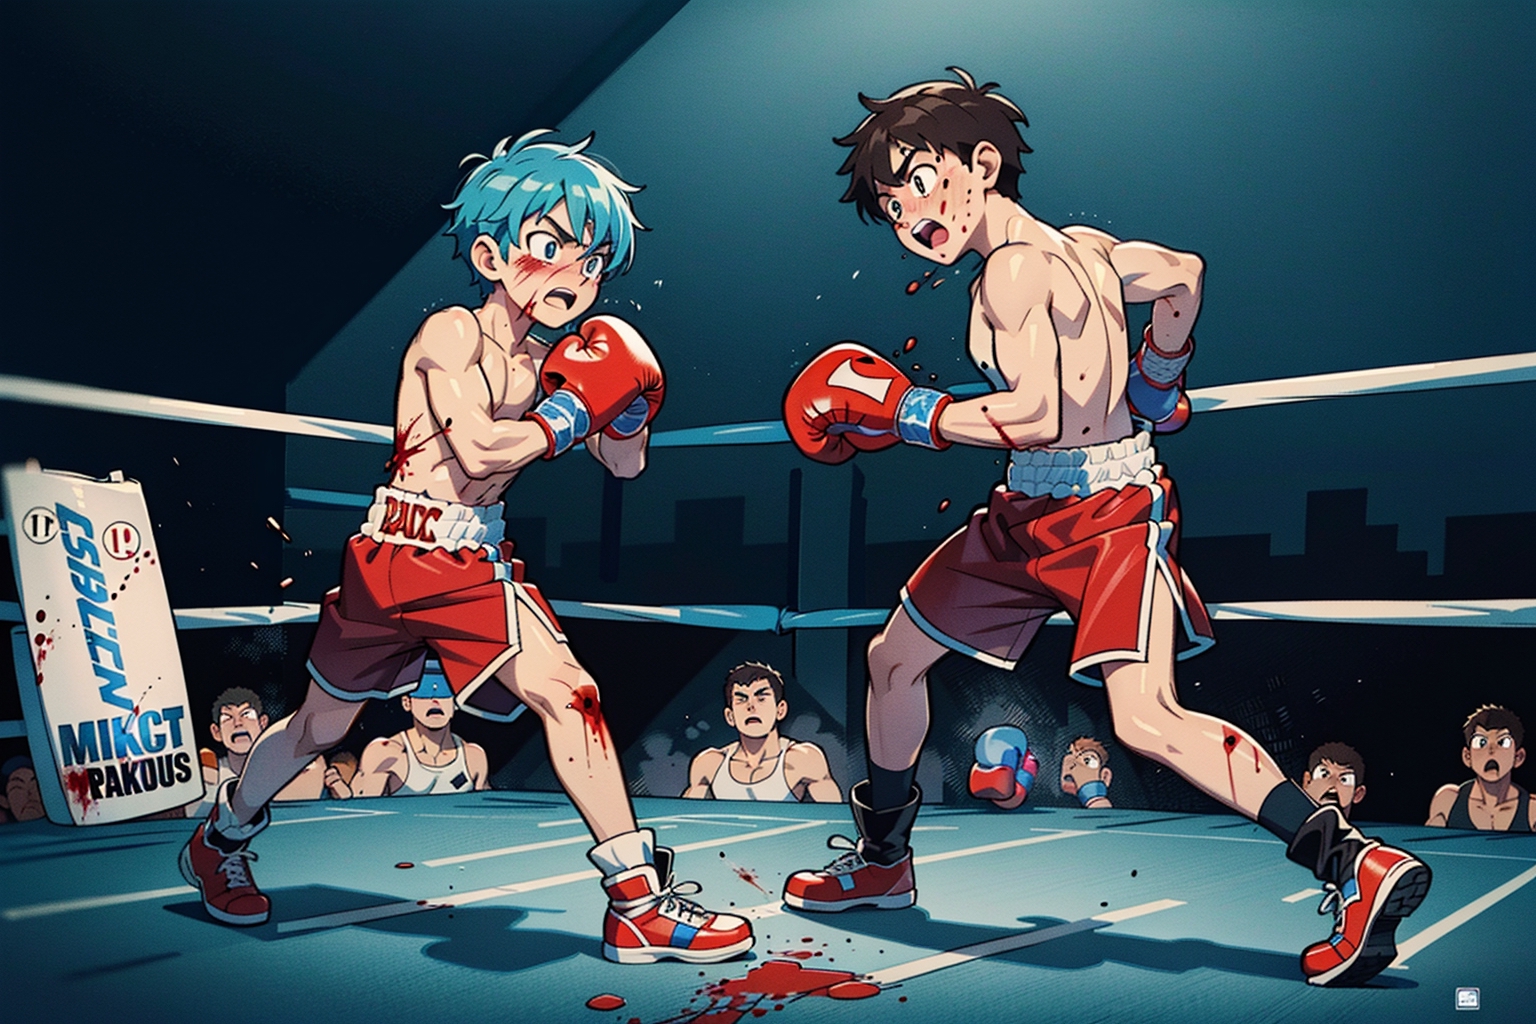 monkeyboy's anime collection - Hajime no Ippo - Other Opponents/Boxers